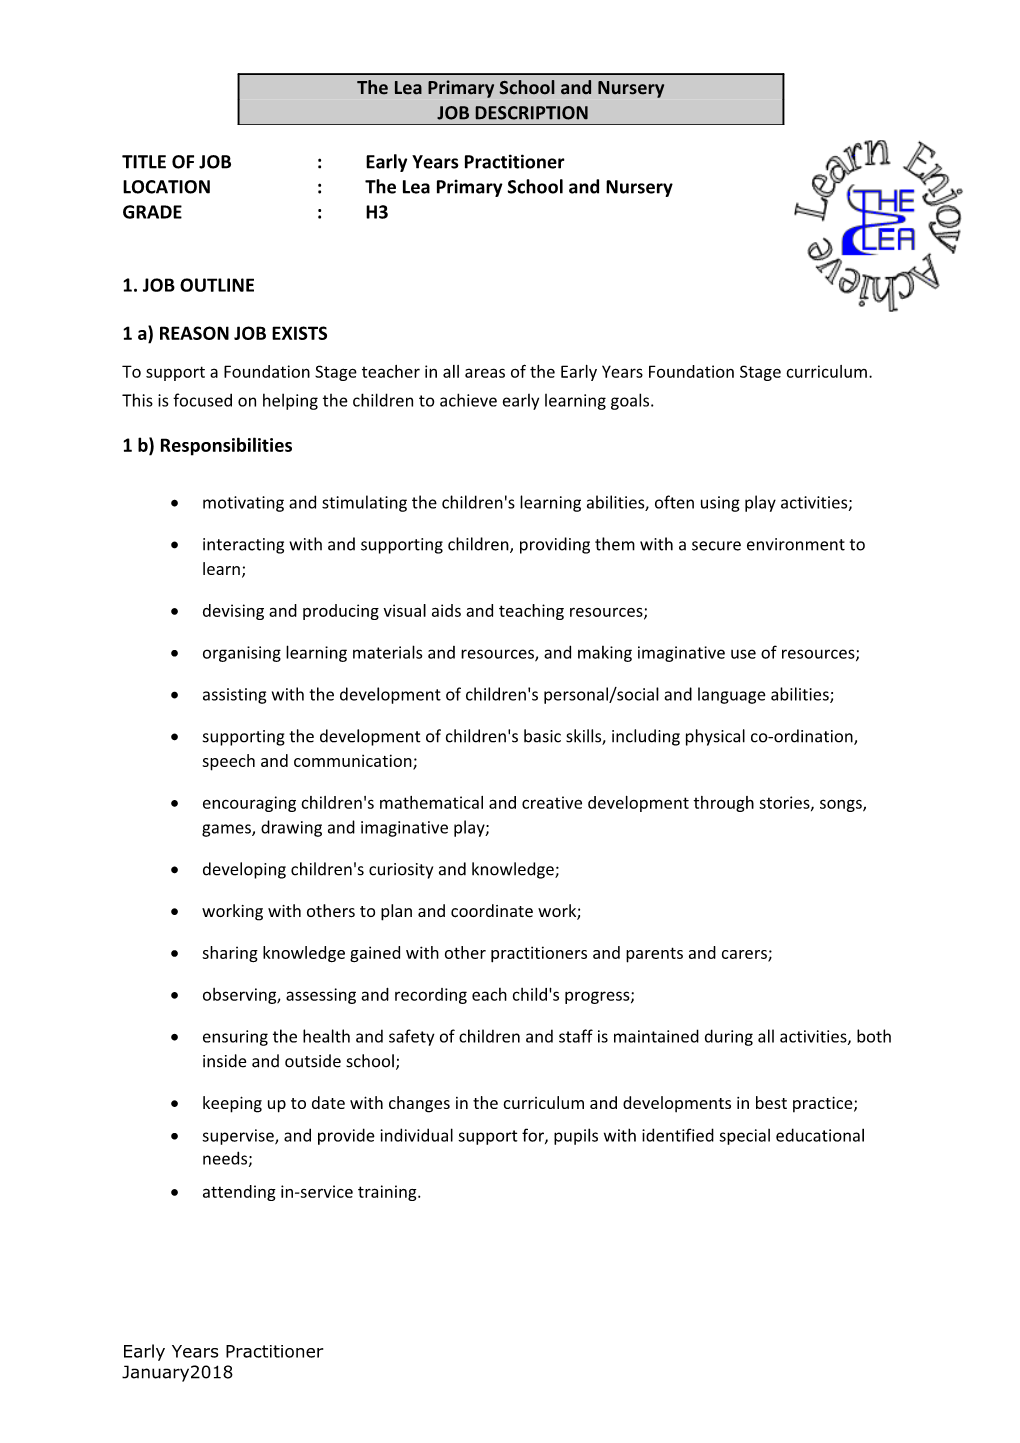 Model Job Descriptions - Early Years Practitioner